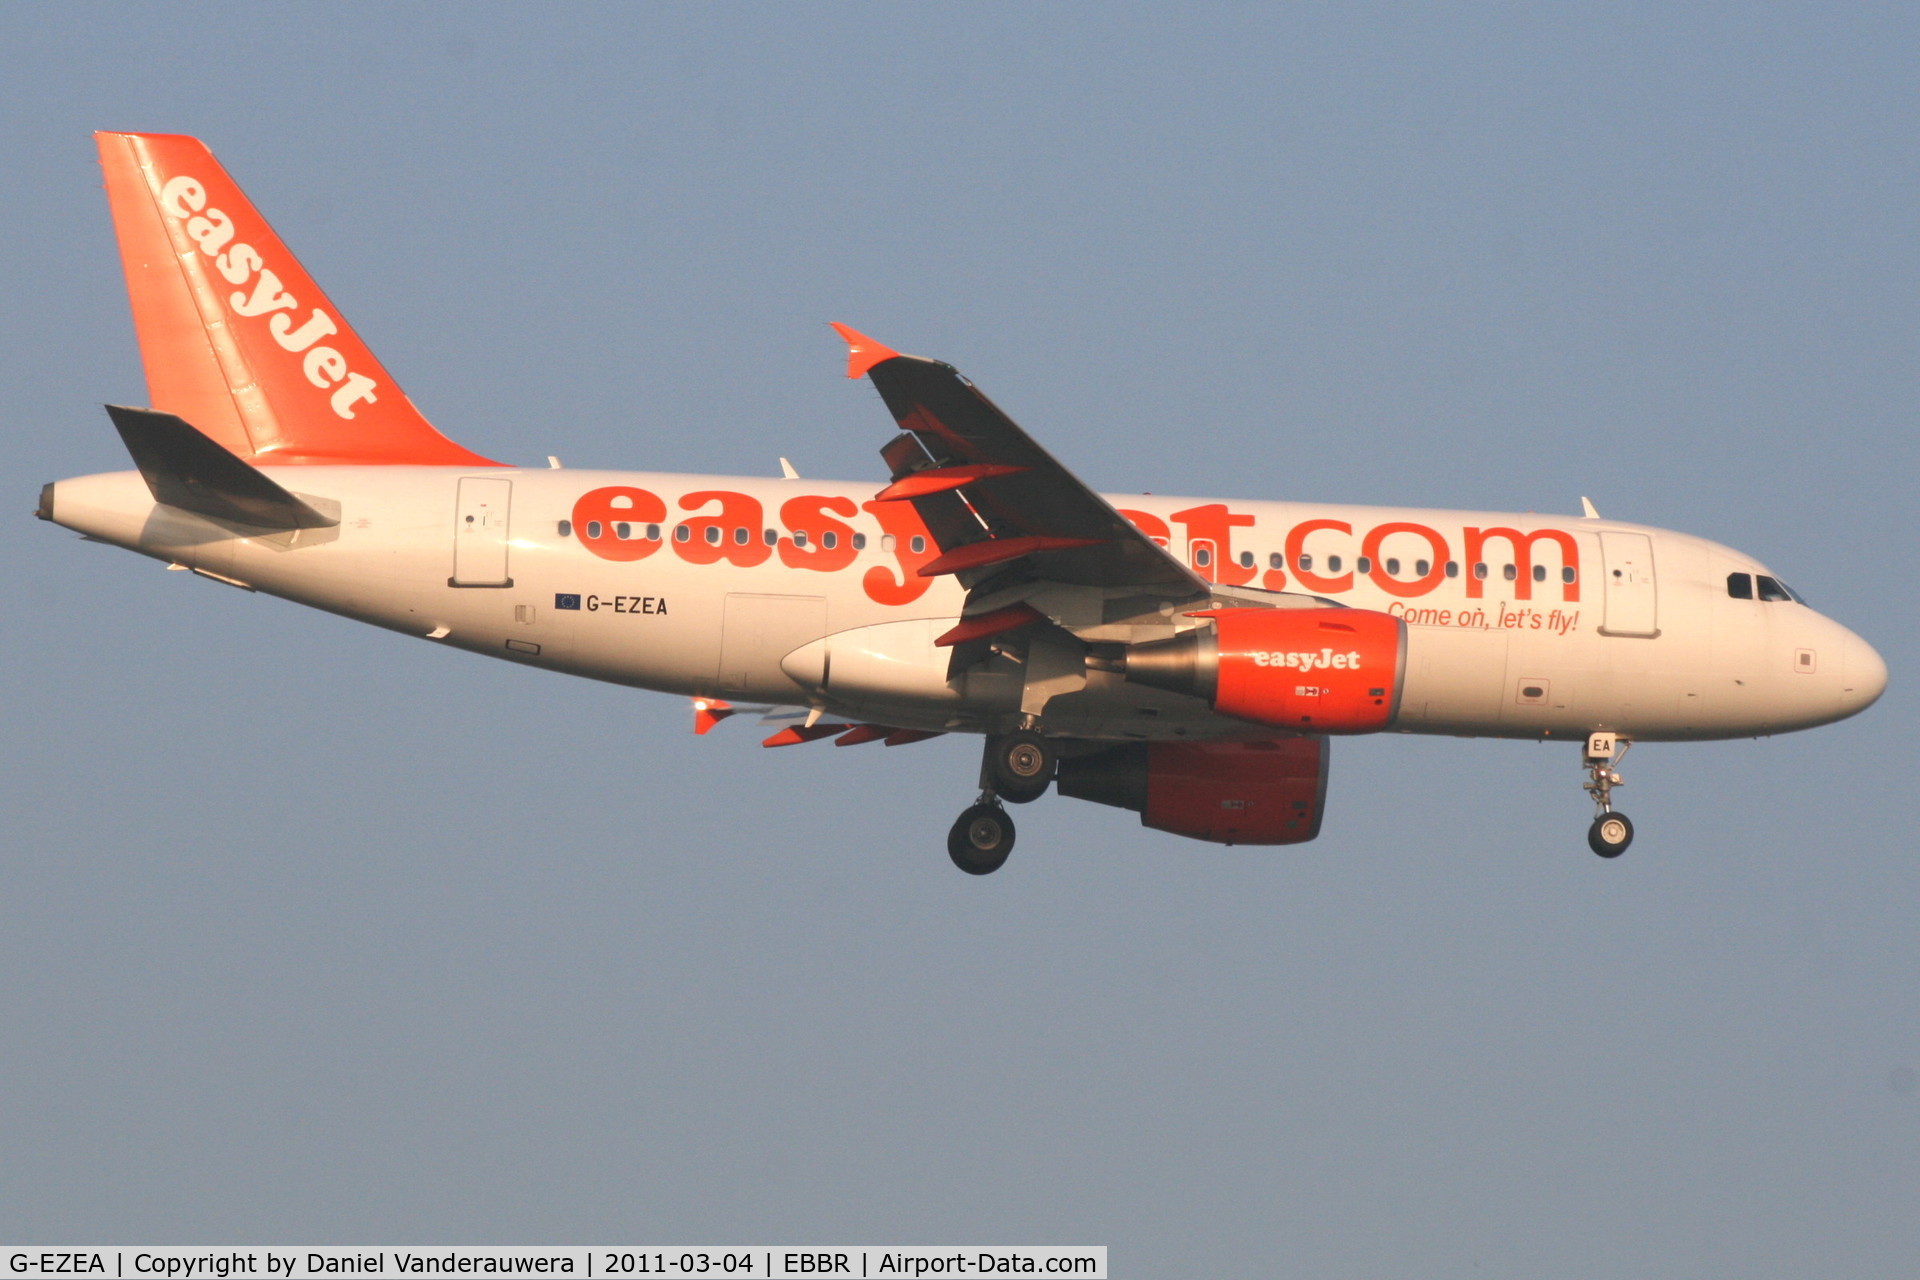 G-EZEA, 2003 Airbus A319-111 C/N 2119, Early arrival of flight EZY2195 to RWY 02